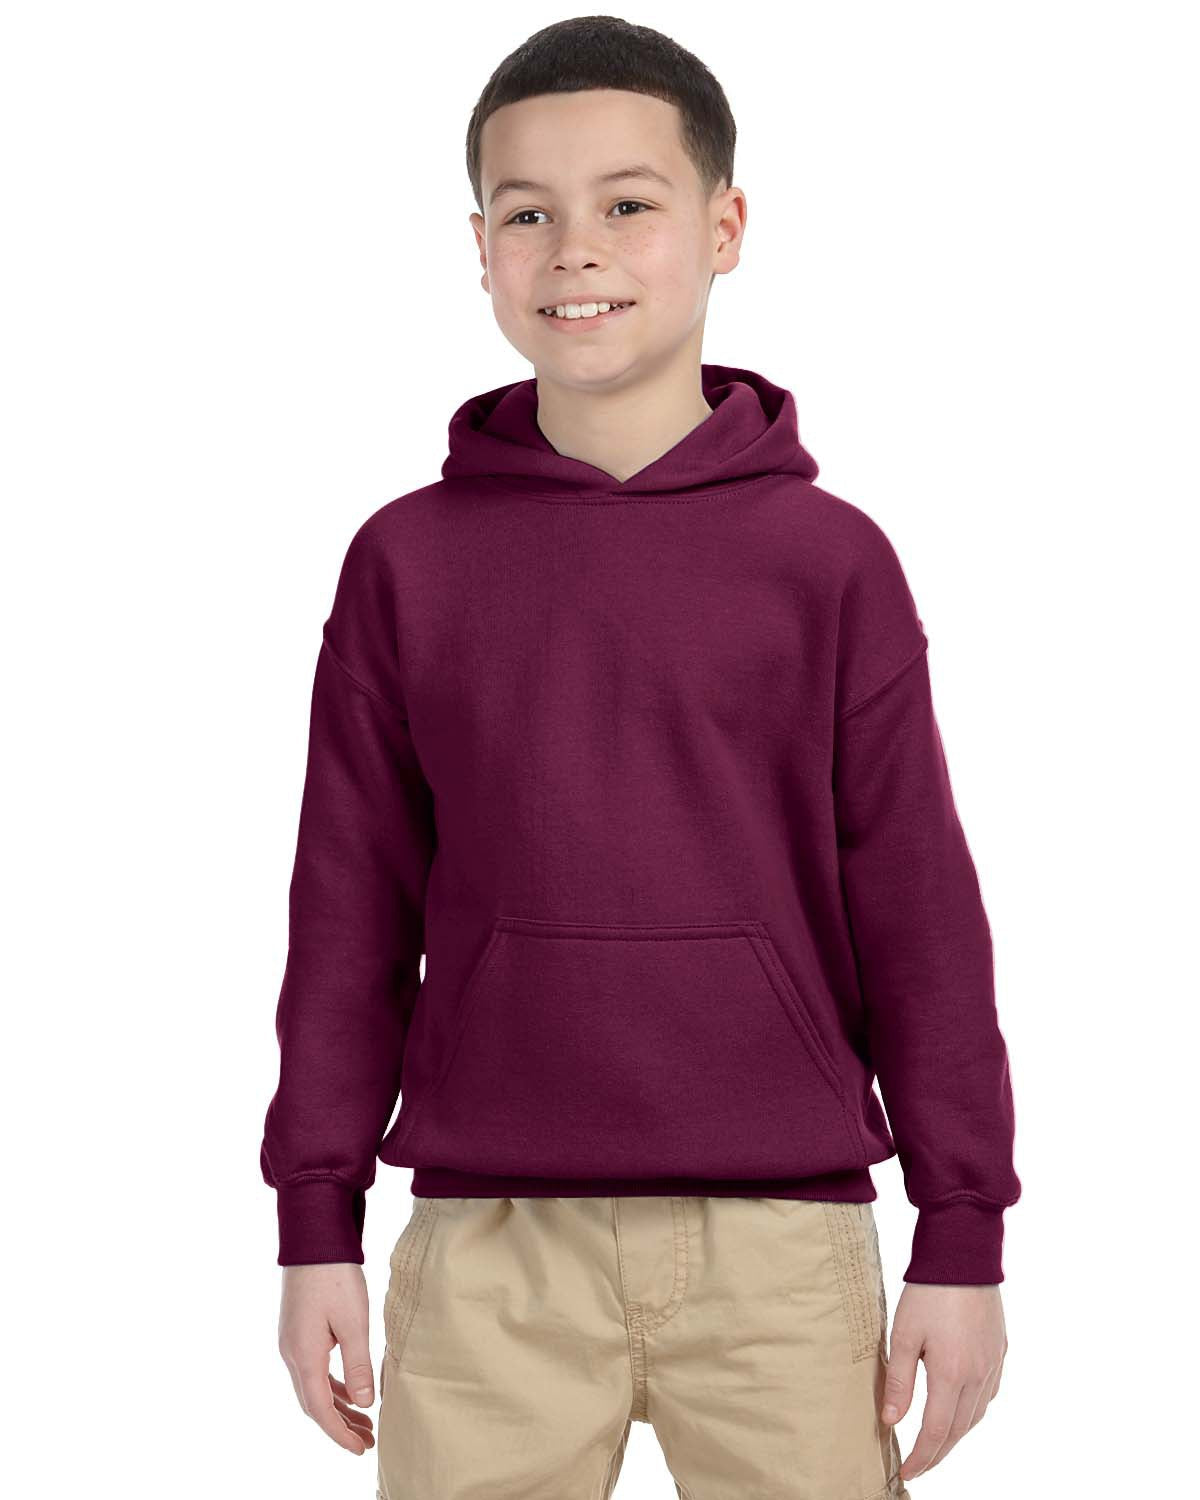 Holly’s Favorite YOUTH Basic Hooded Sweatshirt